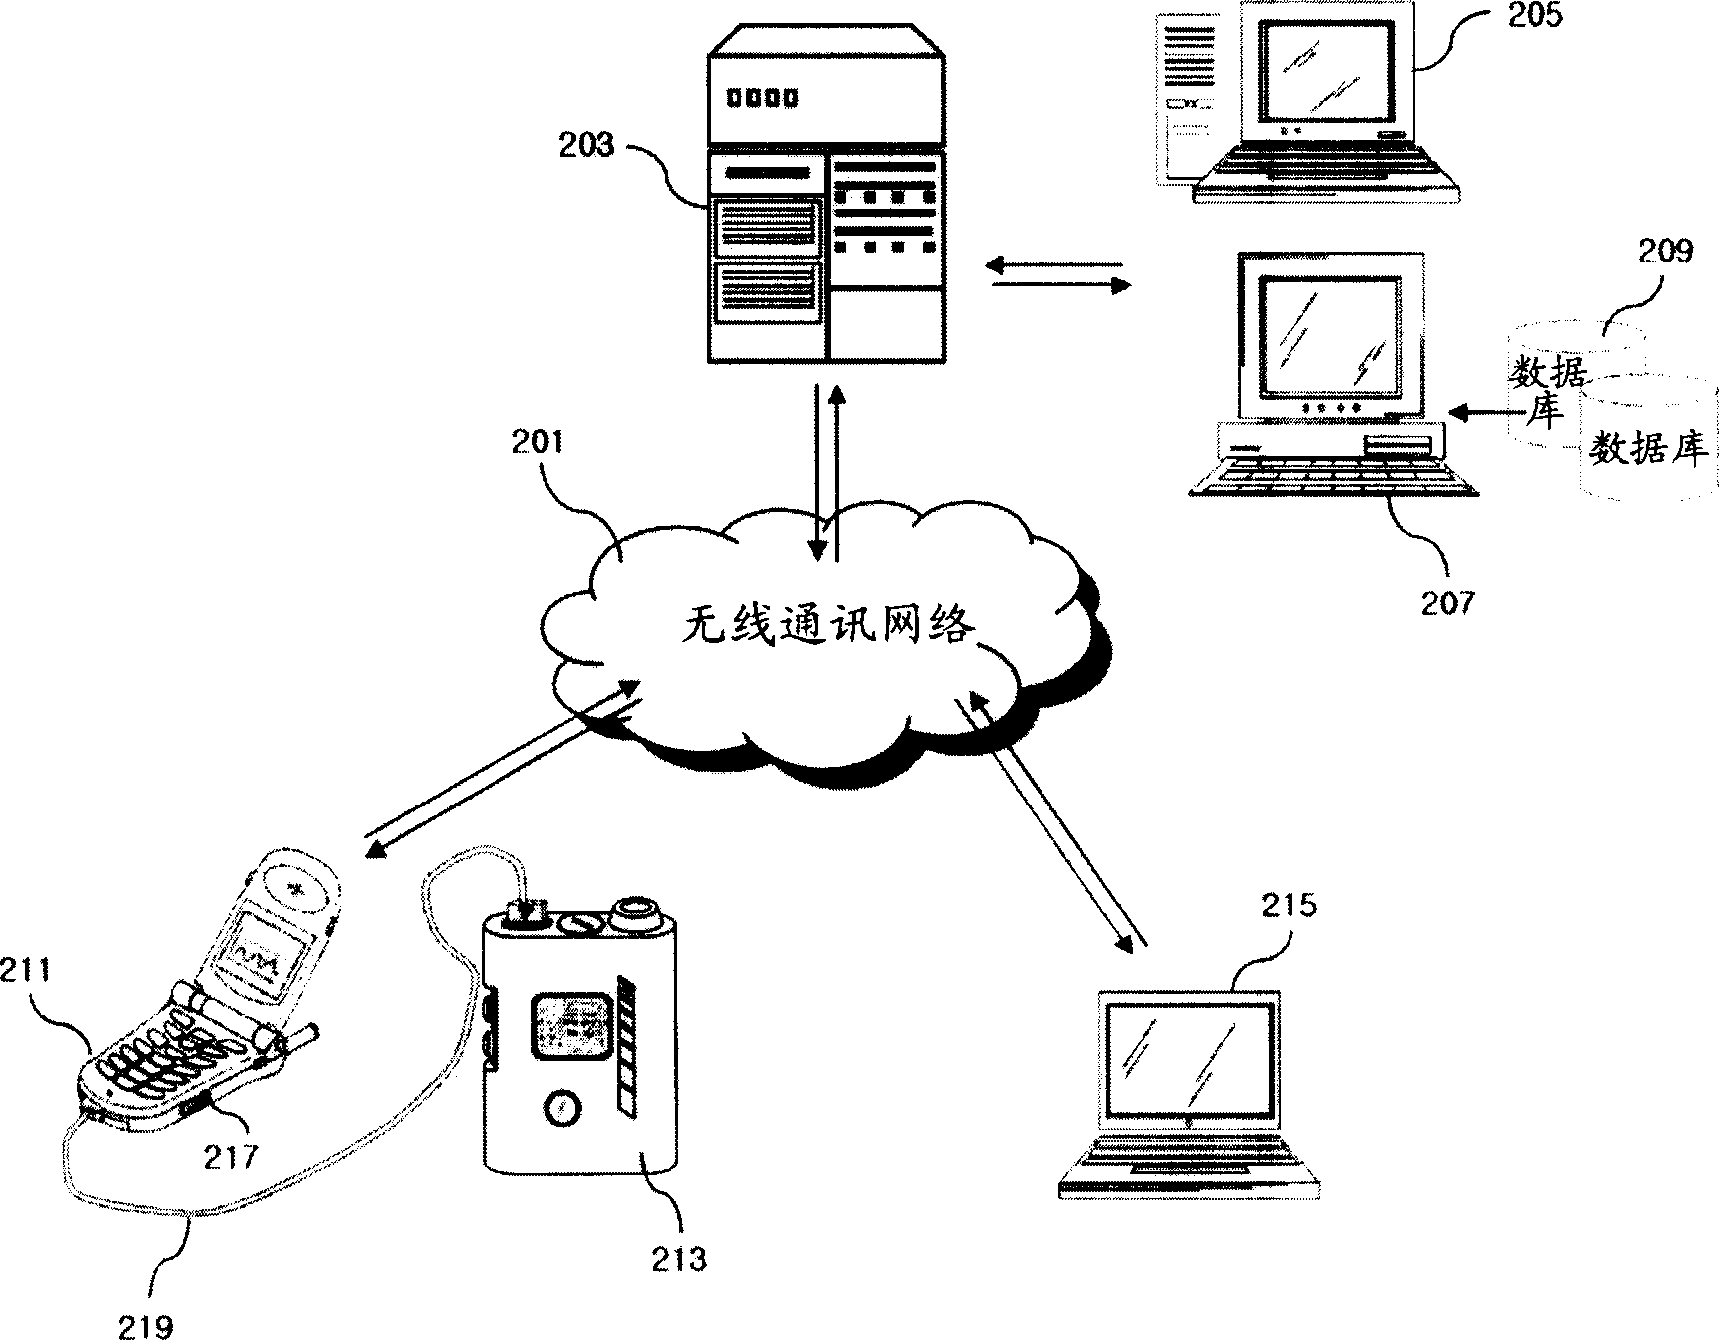 Insulin pump for use in conjunction with mobile coomunication terminal capable of measuring blood glucose levels and network system for transmitting control information for insulin pump